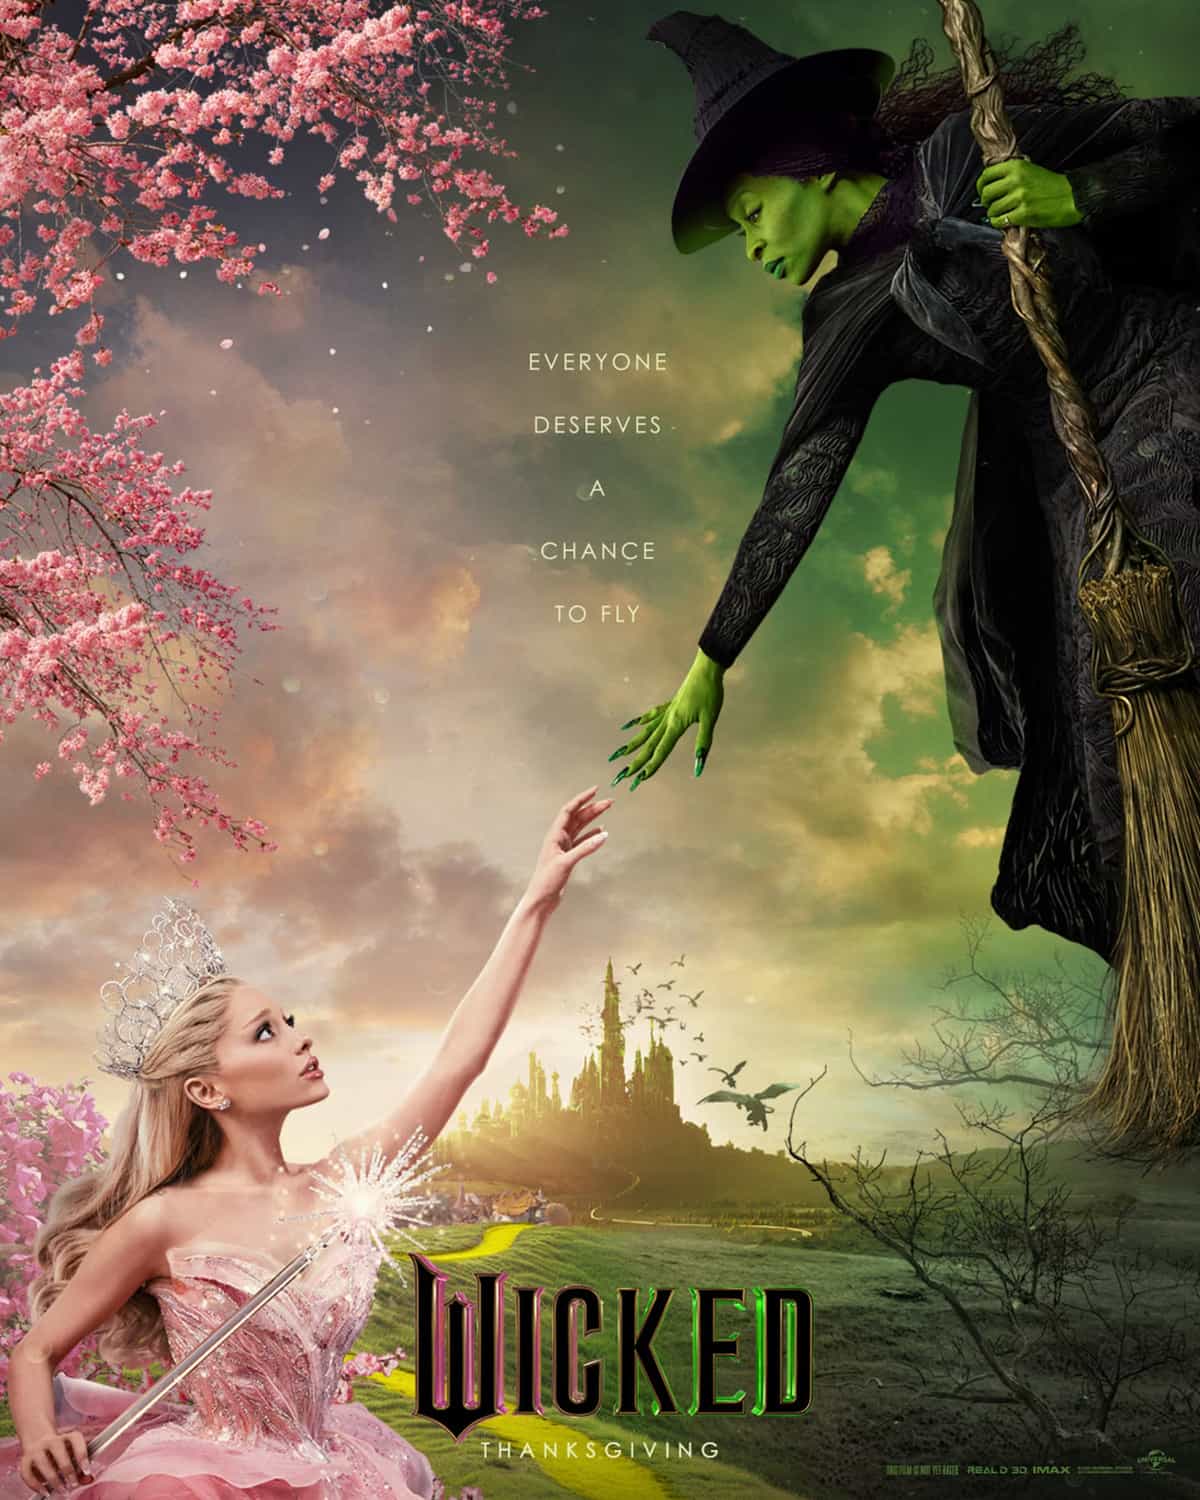 Check out the new trailer for upcoming movie Wicked which stars Cynthia Erivo and Ariana Grande - movie UK release date 24th November 2024 #wicked